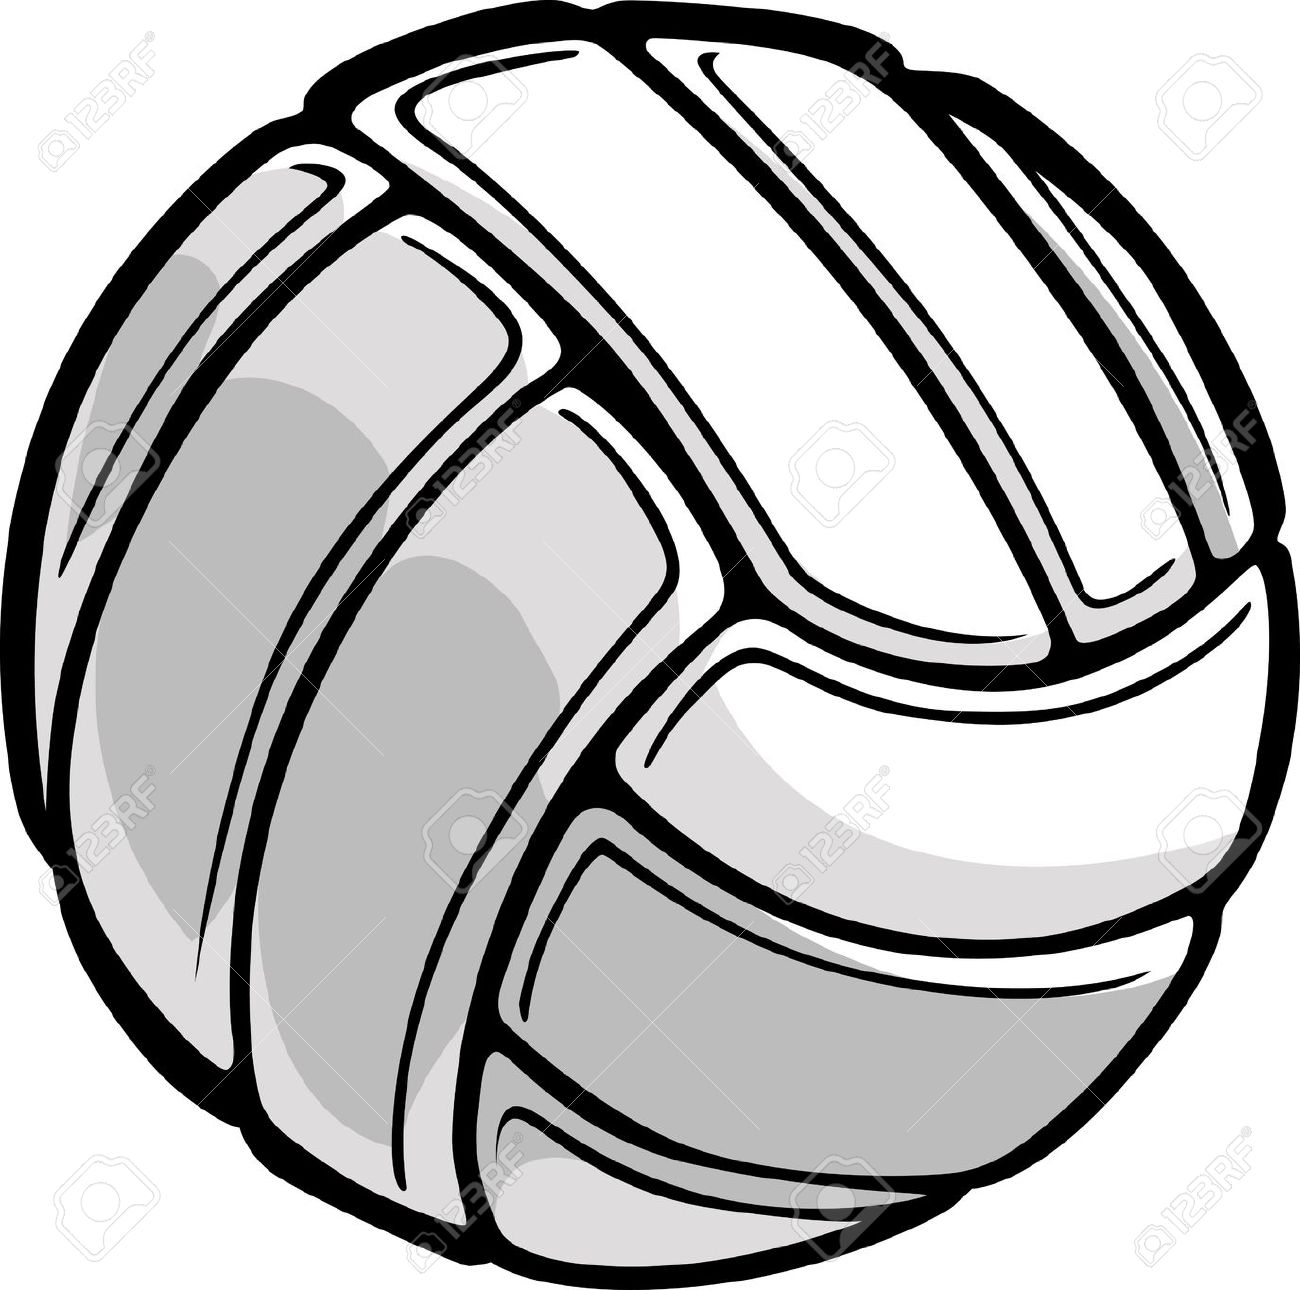 Volleyball Clip Art: Add a Creative Touch to Your Volleyball Designs